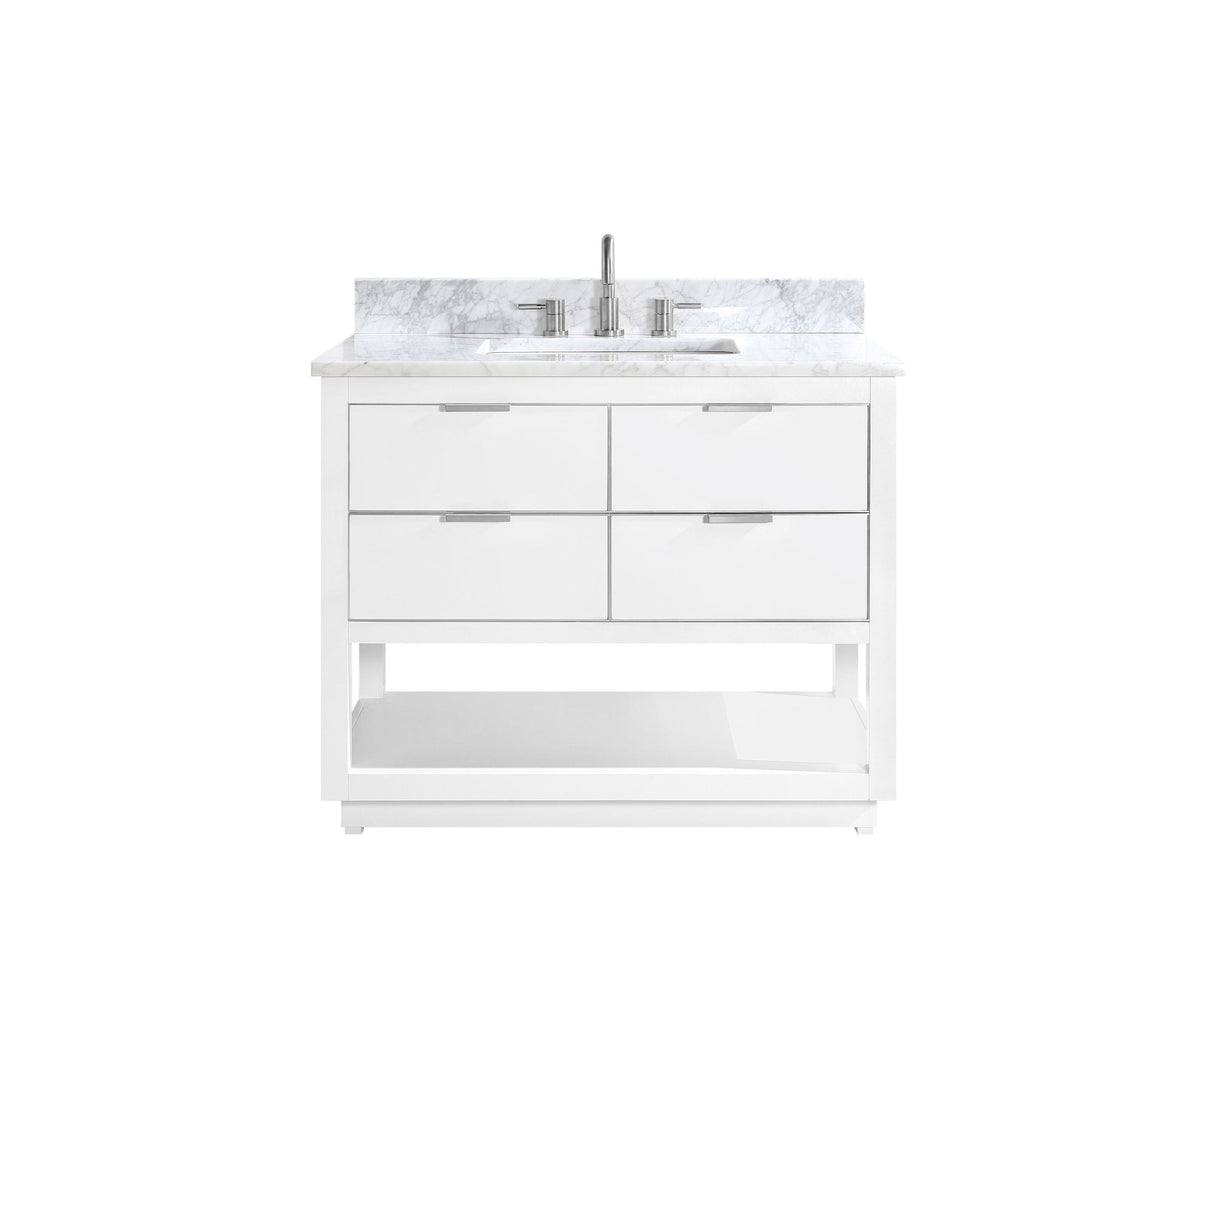 Avanity Allie 43 in. Vanity Combo in White with Silver Trim and Carrara White Marble Top 